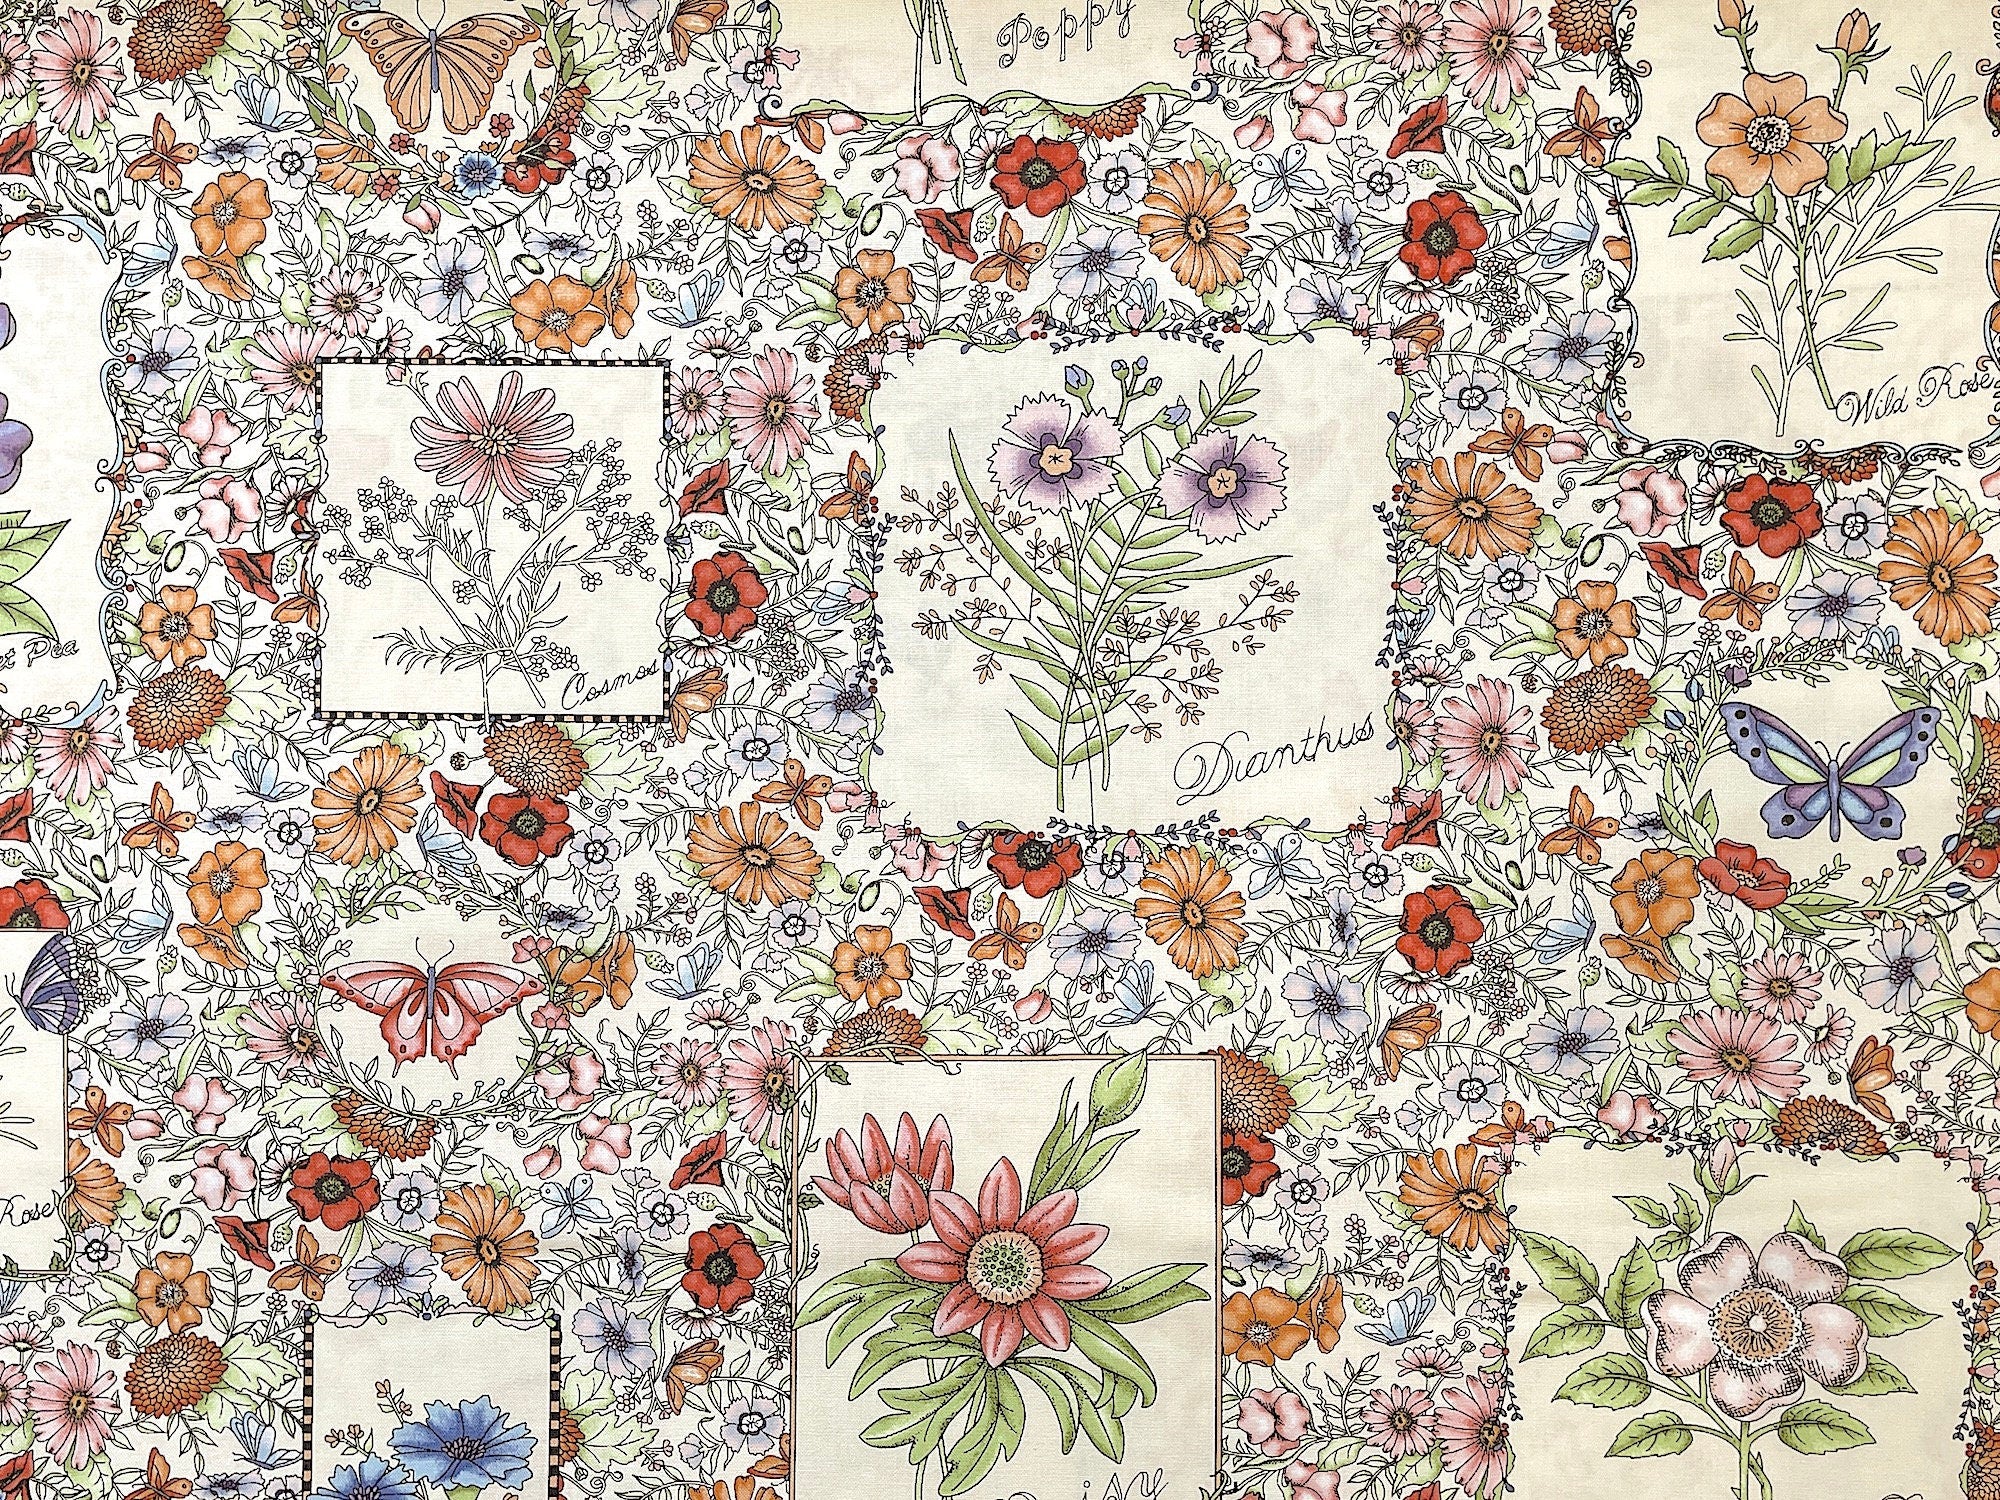 This fabric is called Flower Frames Cream and is part of the Garden Stroll Collection by Kris Lammers. This cream colored fabric is covered with flowers in frames. You will find wild rose, daisies, dianthus, poppies, pansies, butterflies and more on this cream colored fabric.